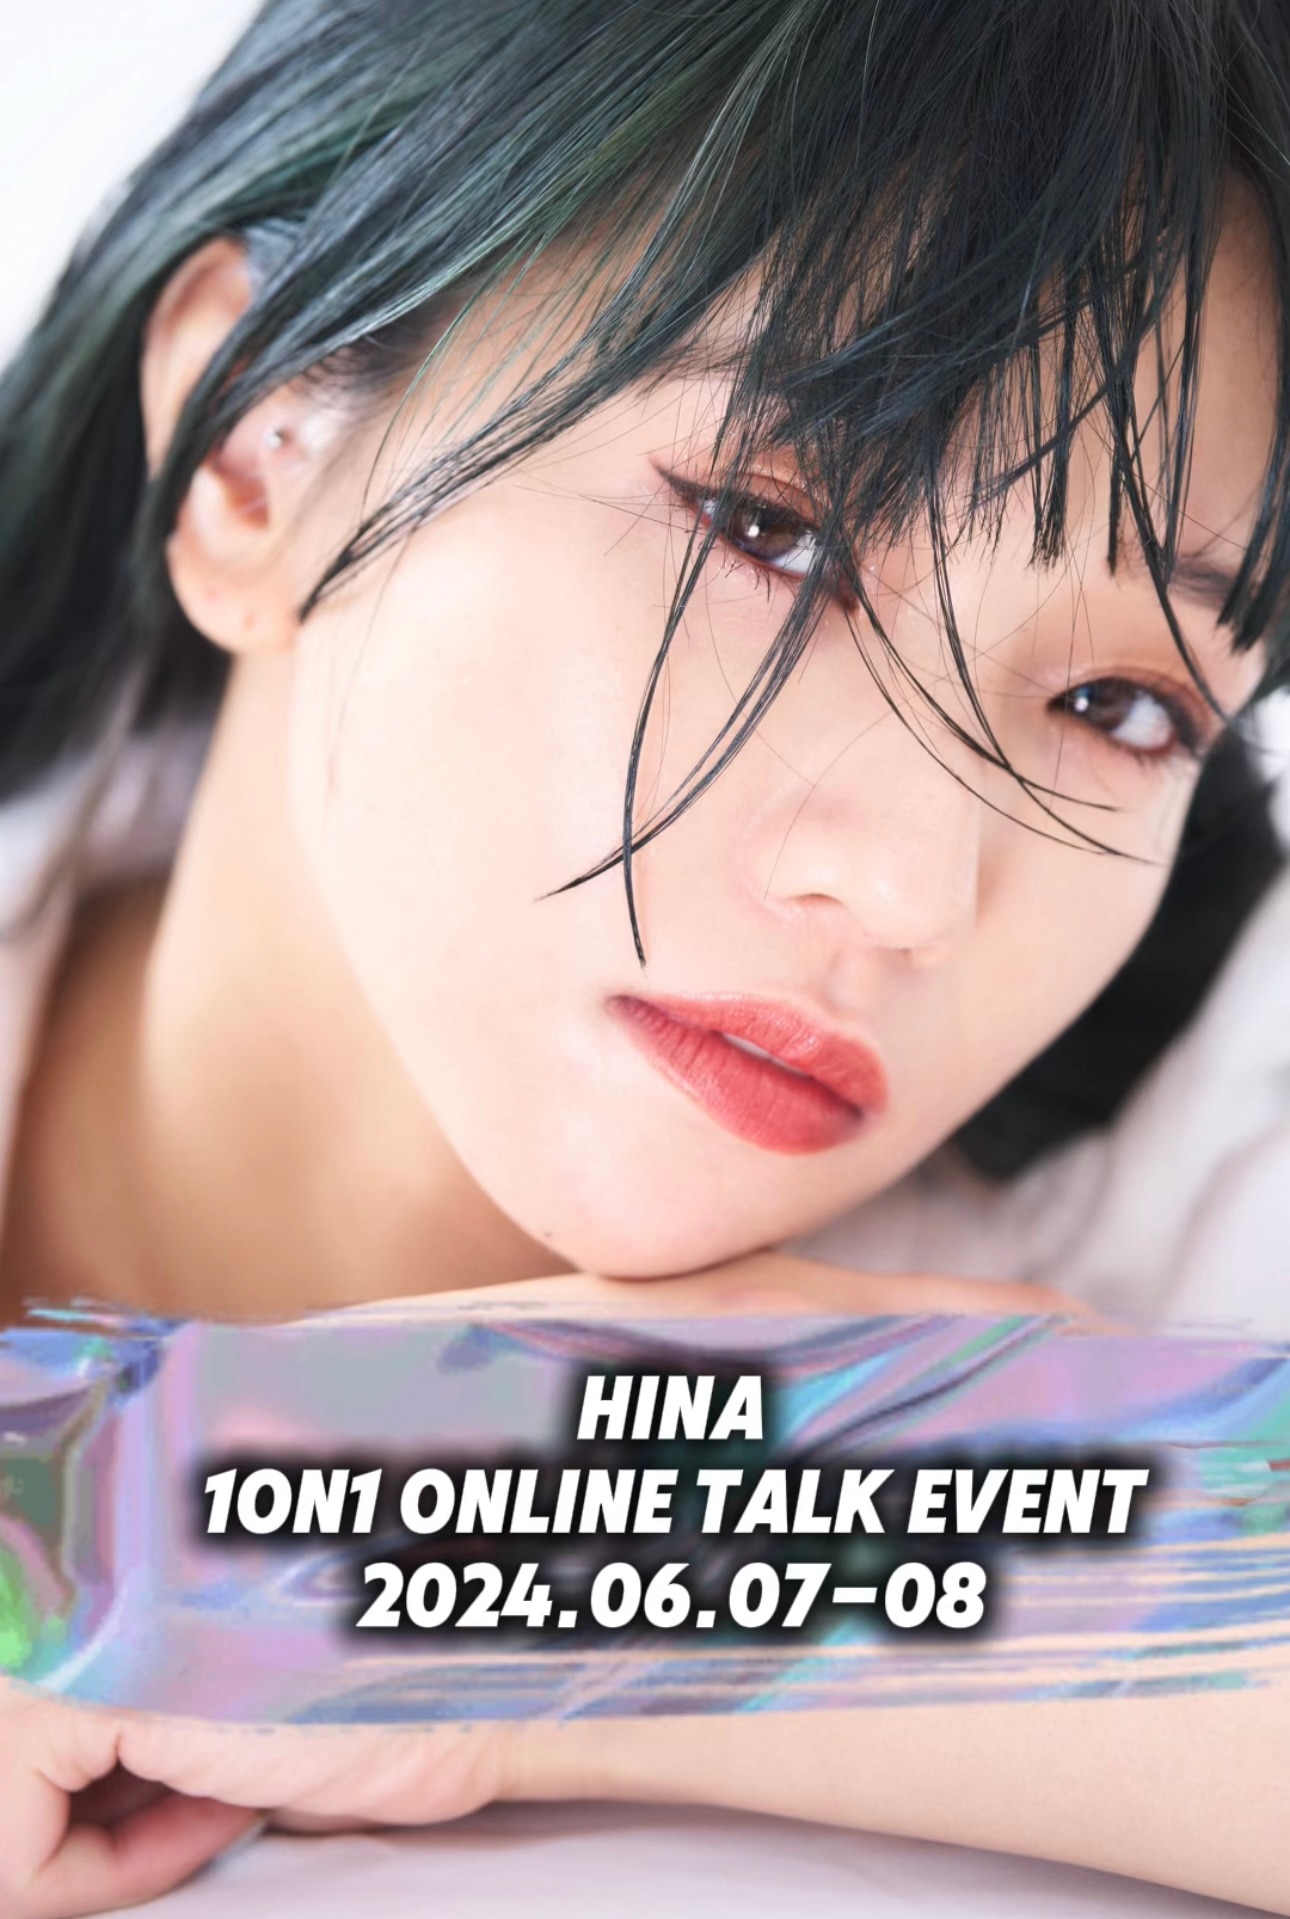 【Hina】 1on1 ONLINE TALK EVENTの開催が決定！！